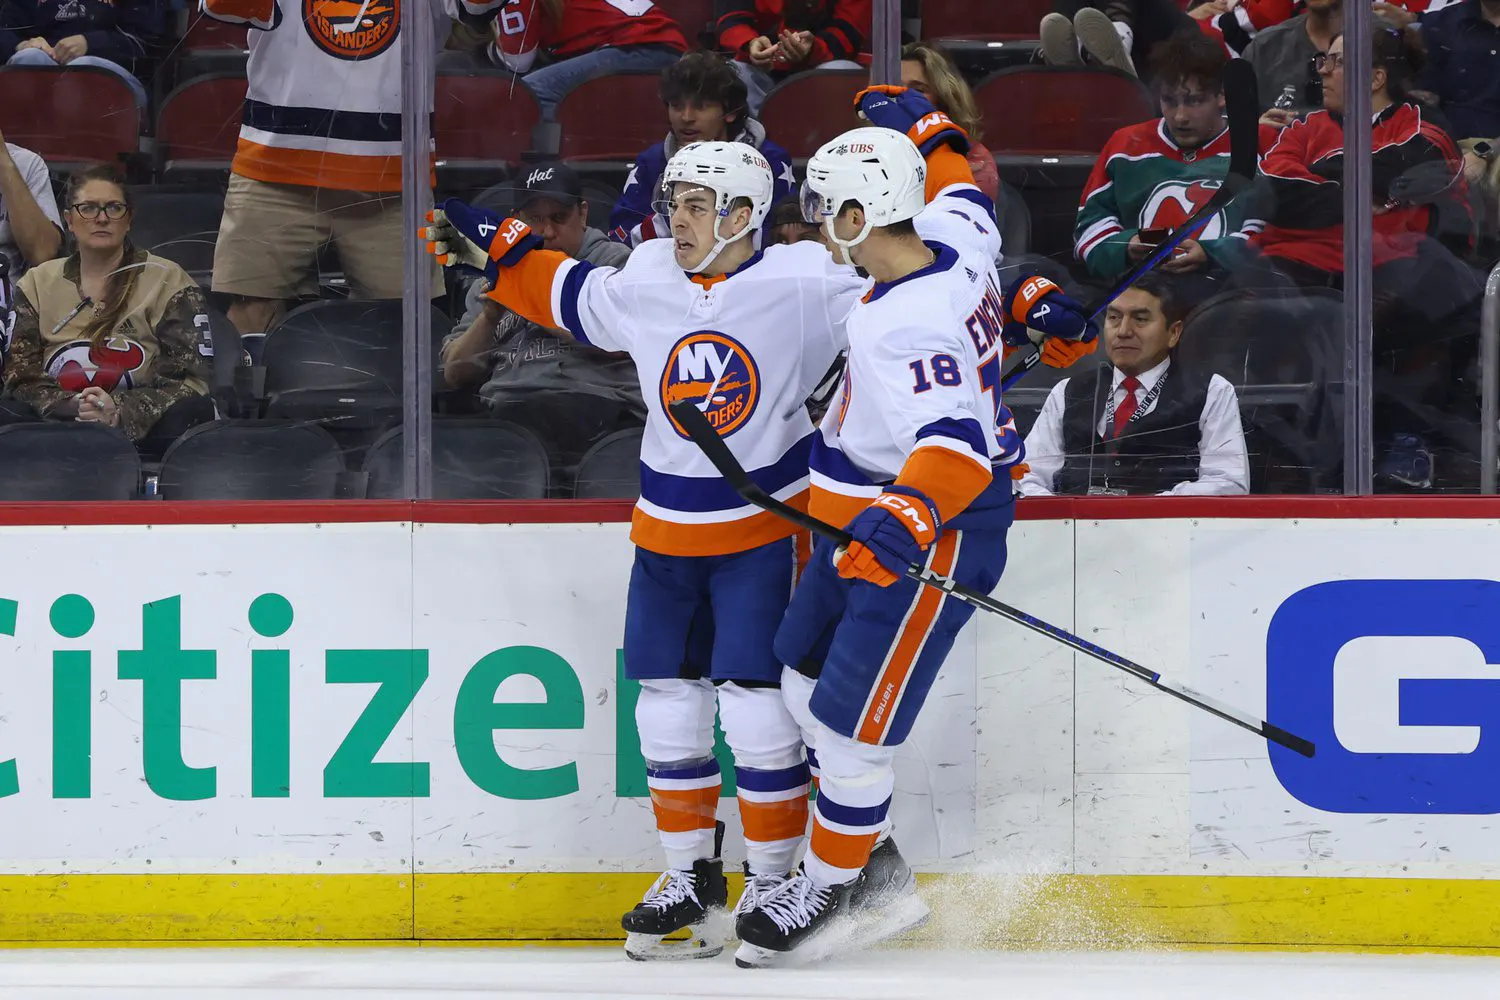 New York Islanders clinch playoff spot with 5-1 win over New Jersey Devils